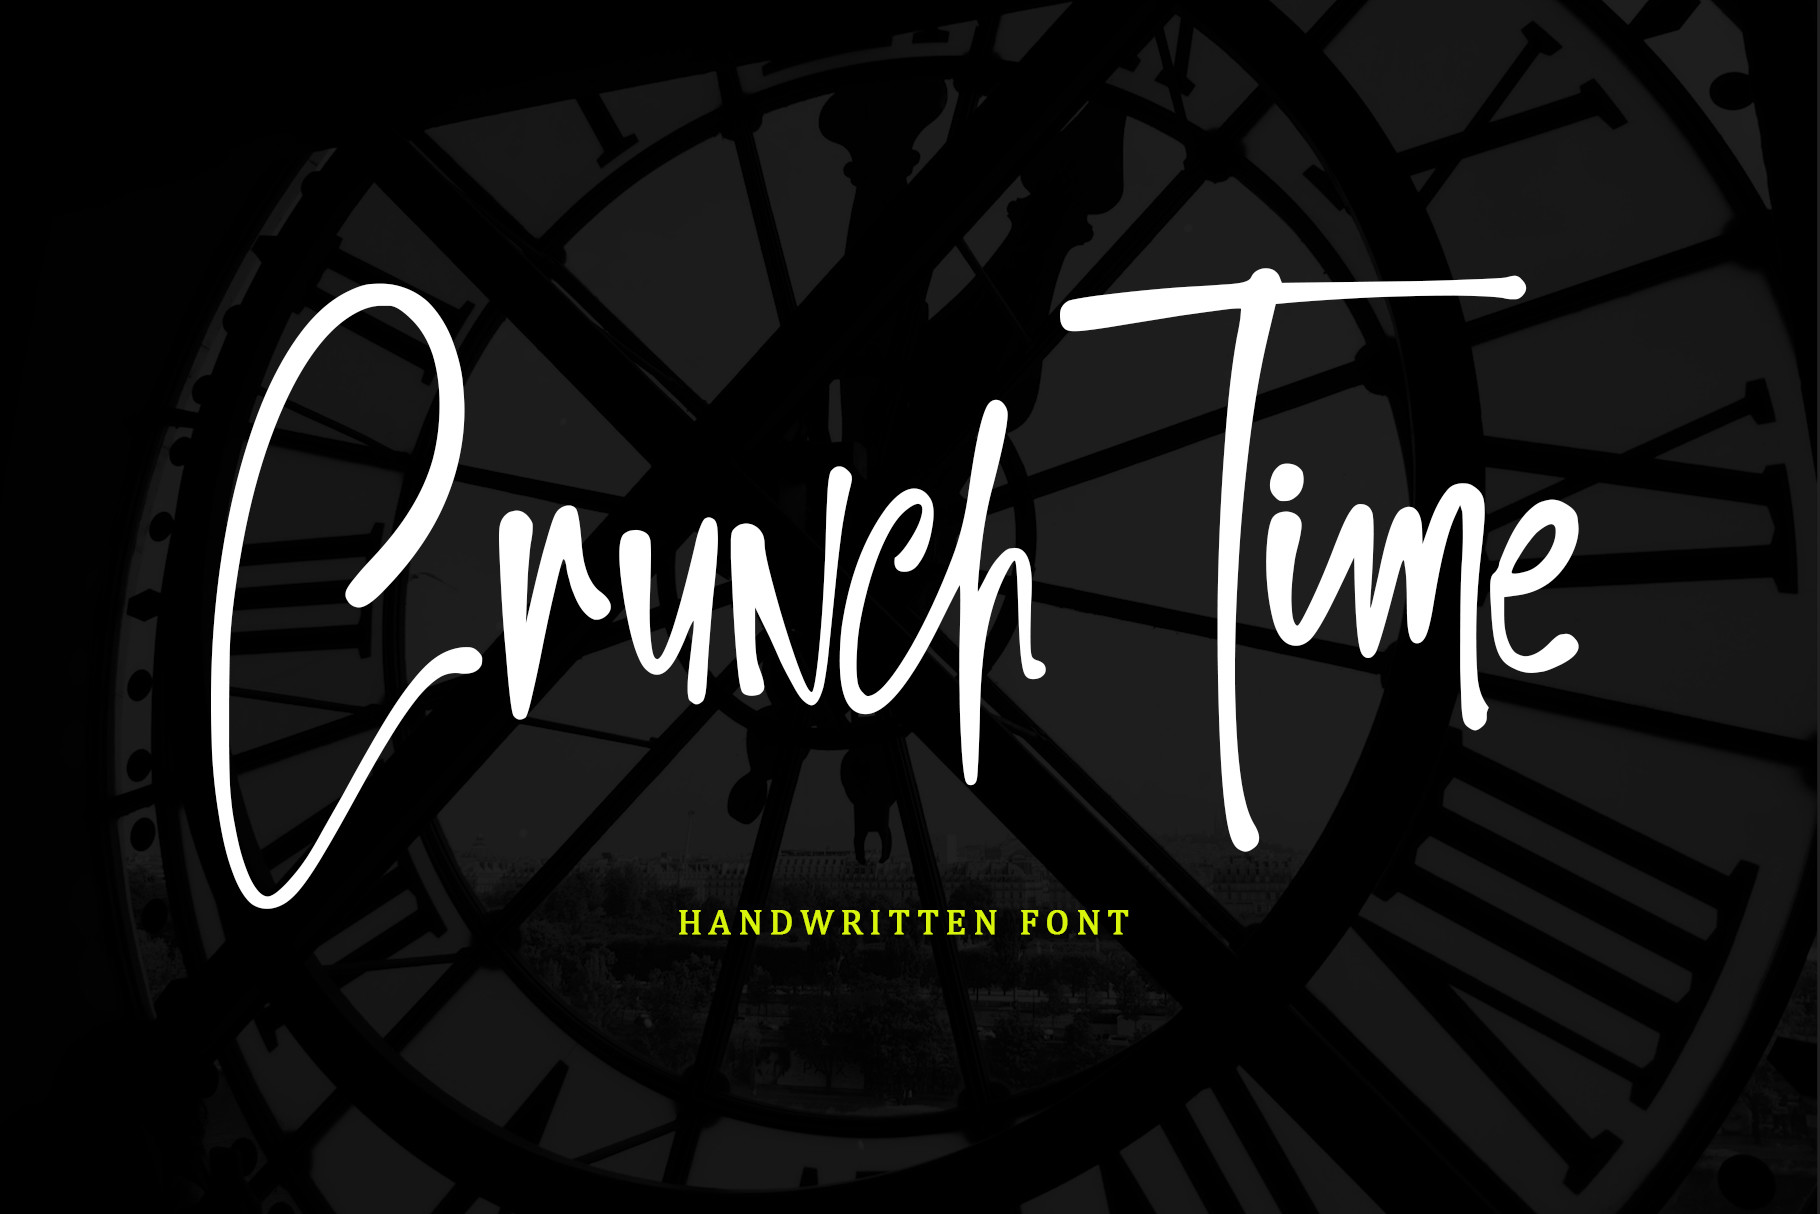 Example font Crunch Time #1